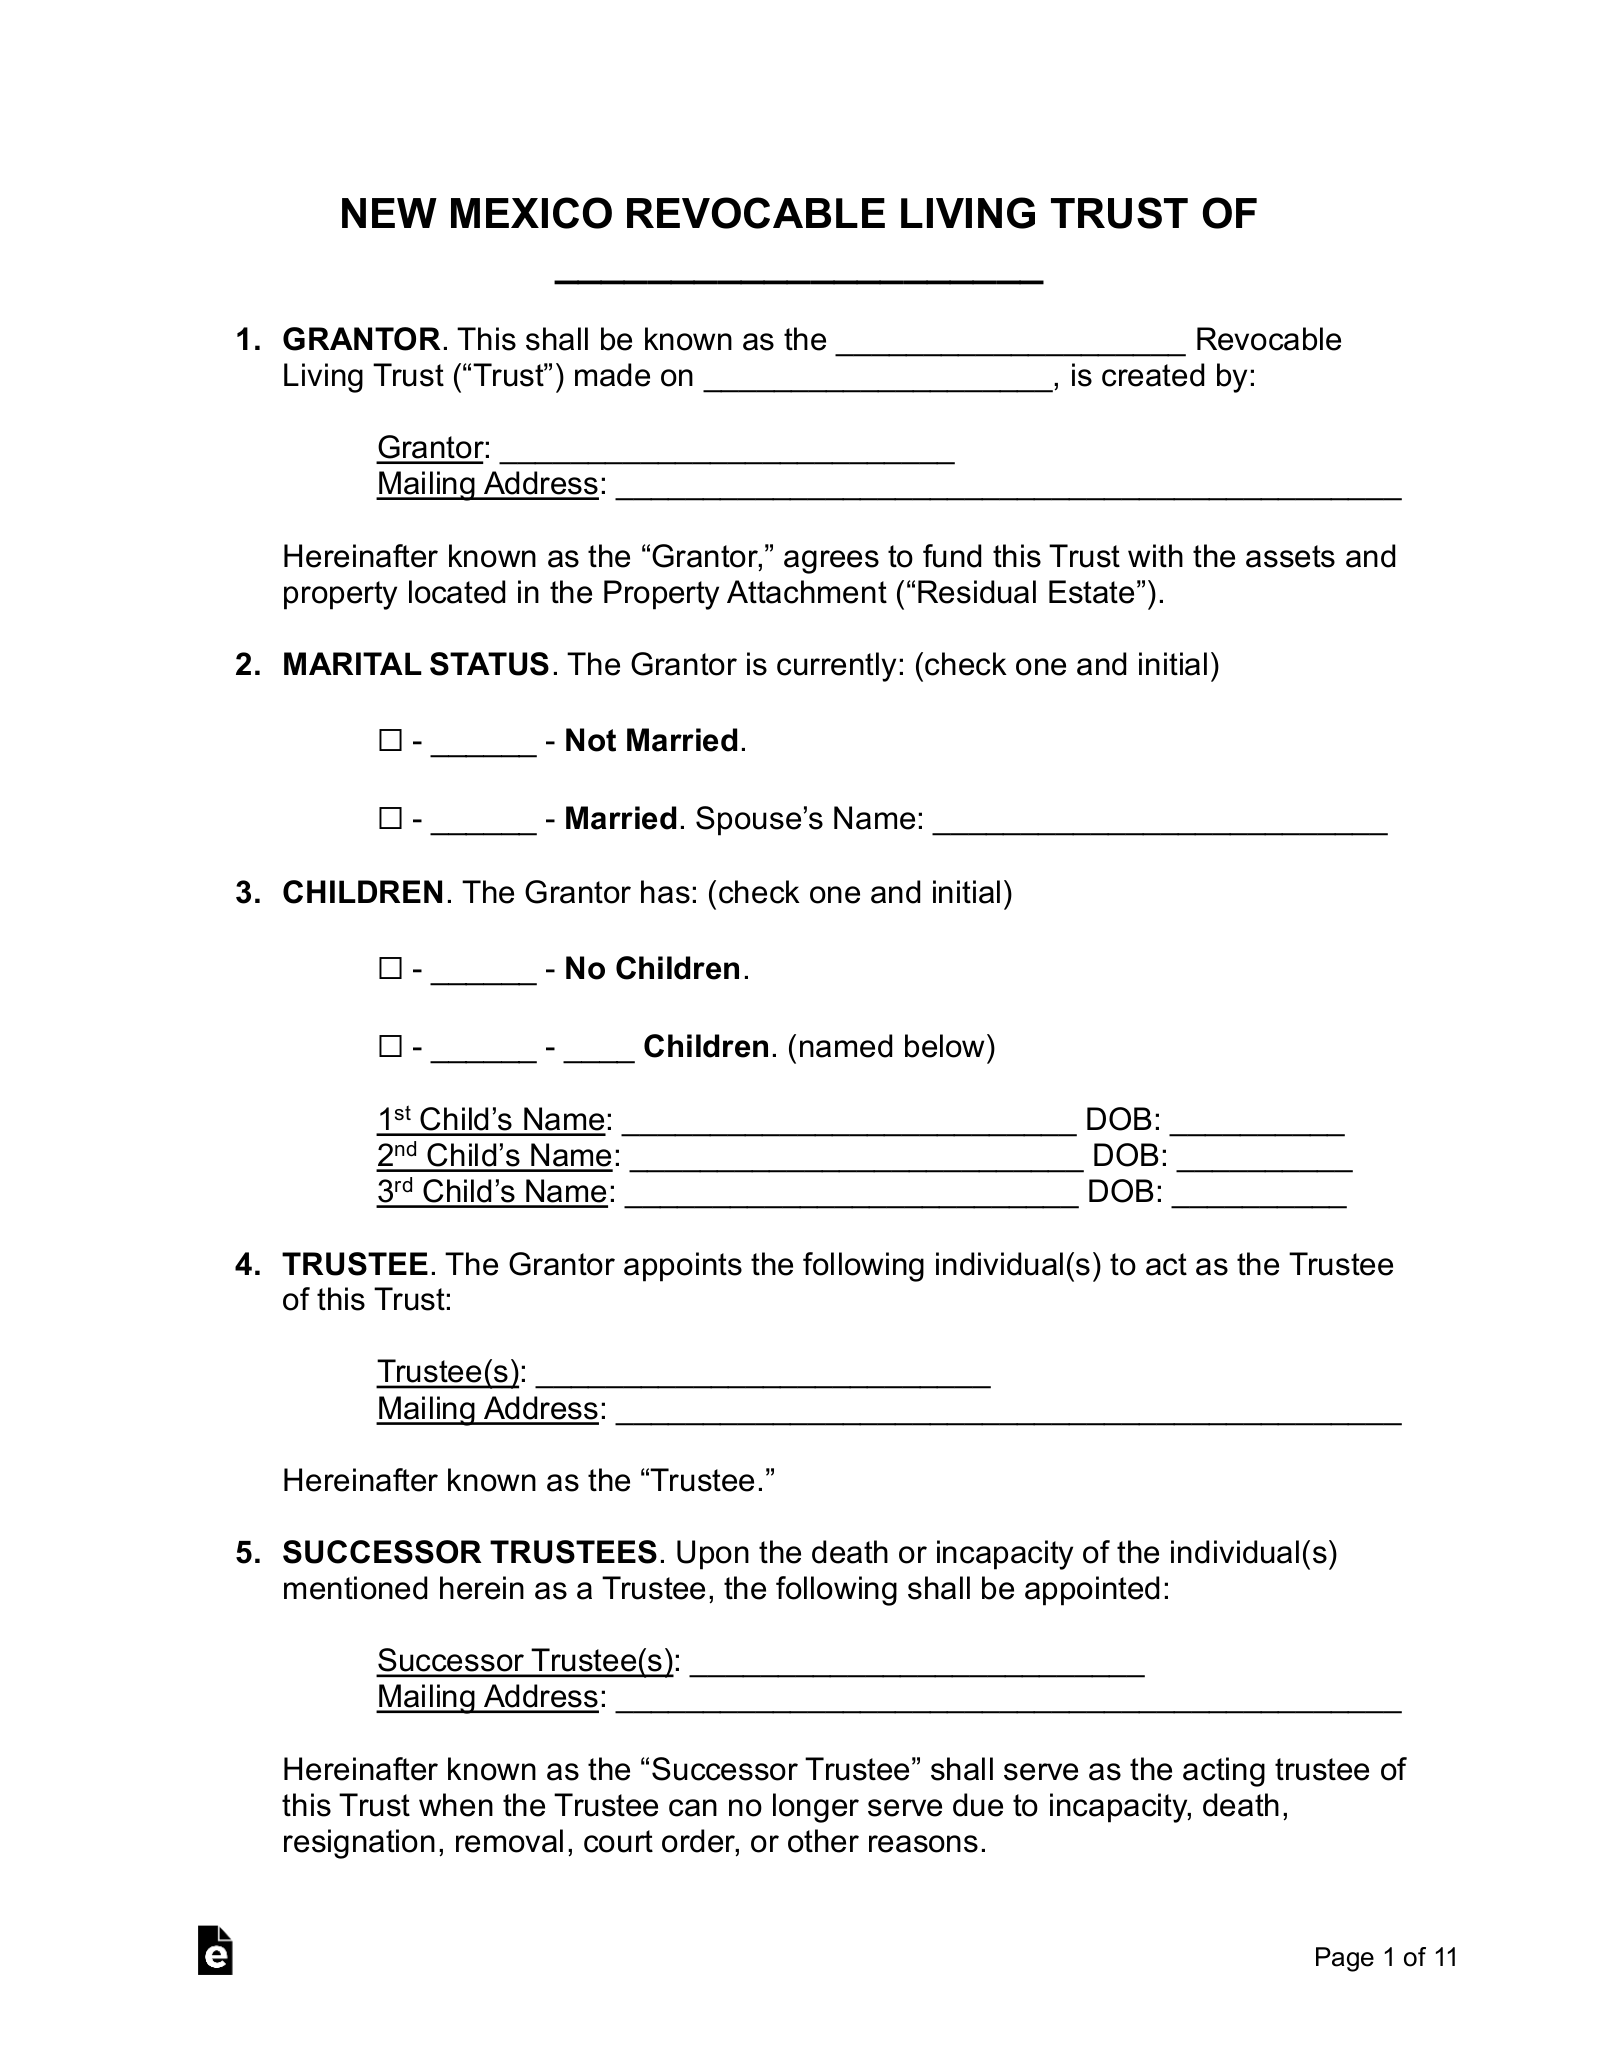 New Mexico Living Trust Form (Revocable)